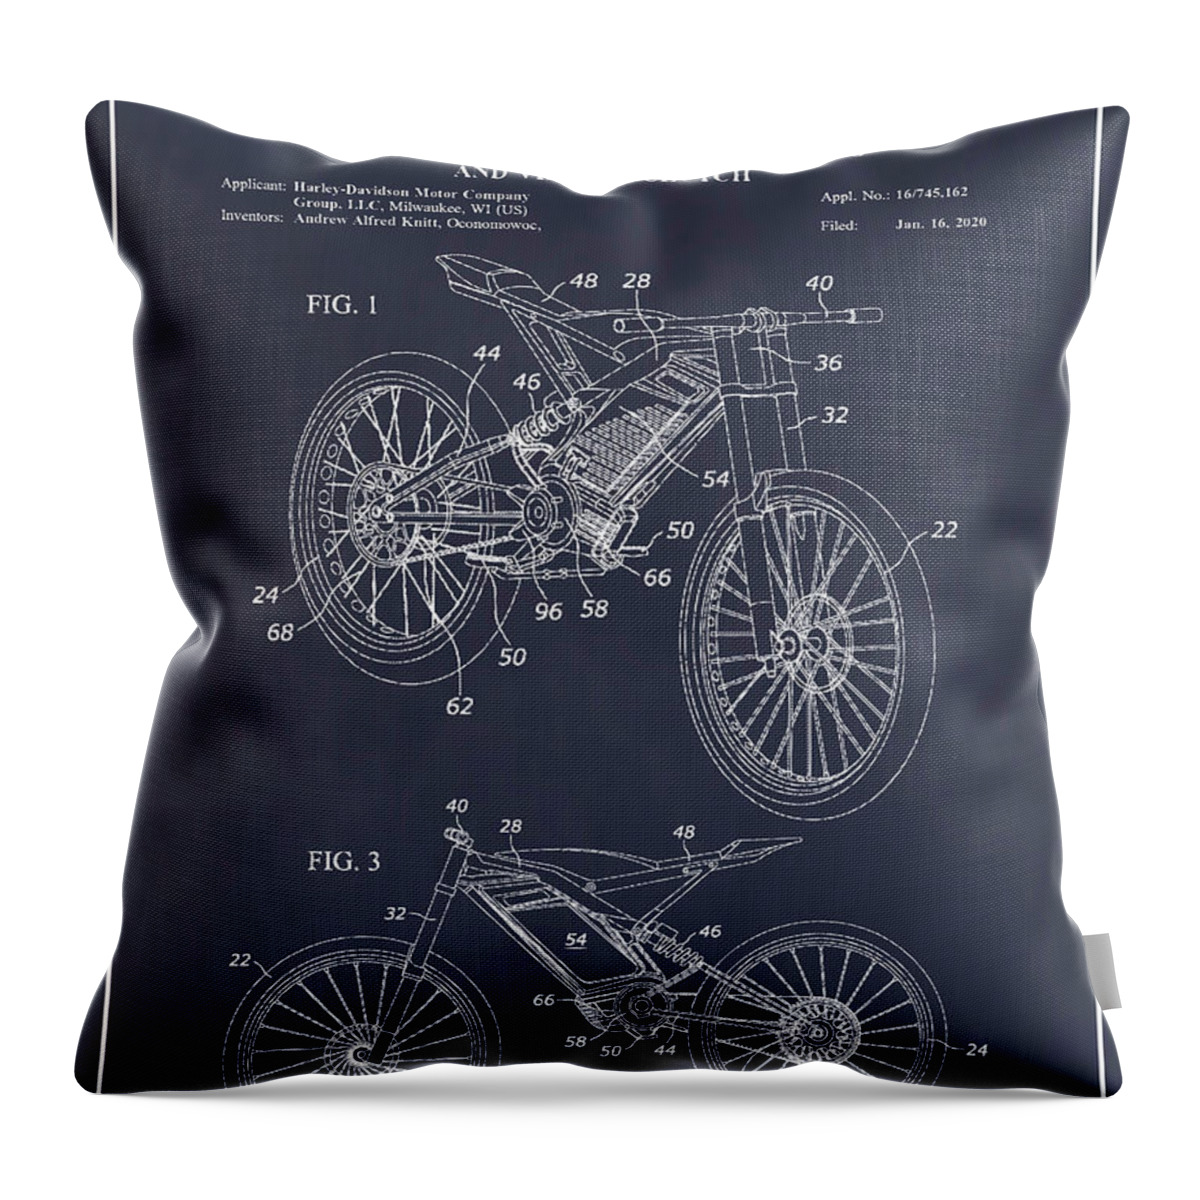 2020 Harley Davidson Electric Motorcycle Patent Print Blackboard Throw Pillow featuring the drawing 2020 Harley Davidson Electric Motorcycle Patent Print Blackboard by Greg Edwards